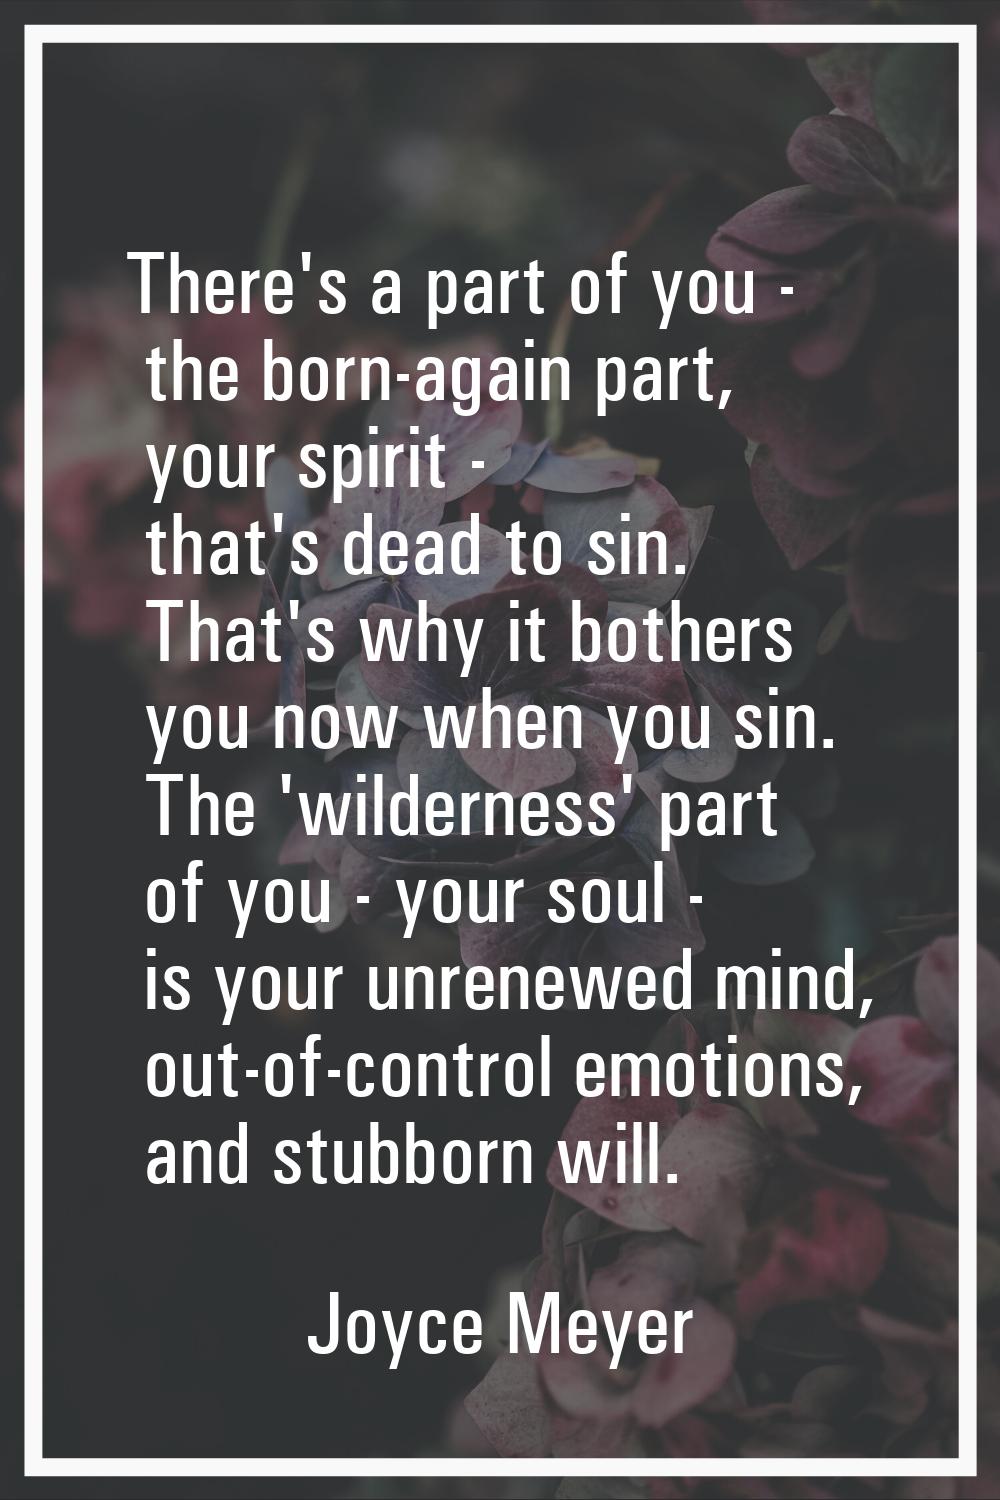 There's a part of you - the born-again part, your spirit - that's dead to sin. That's why it bother